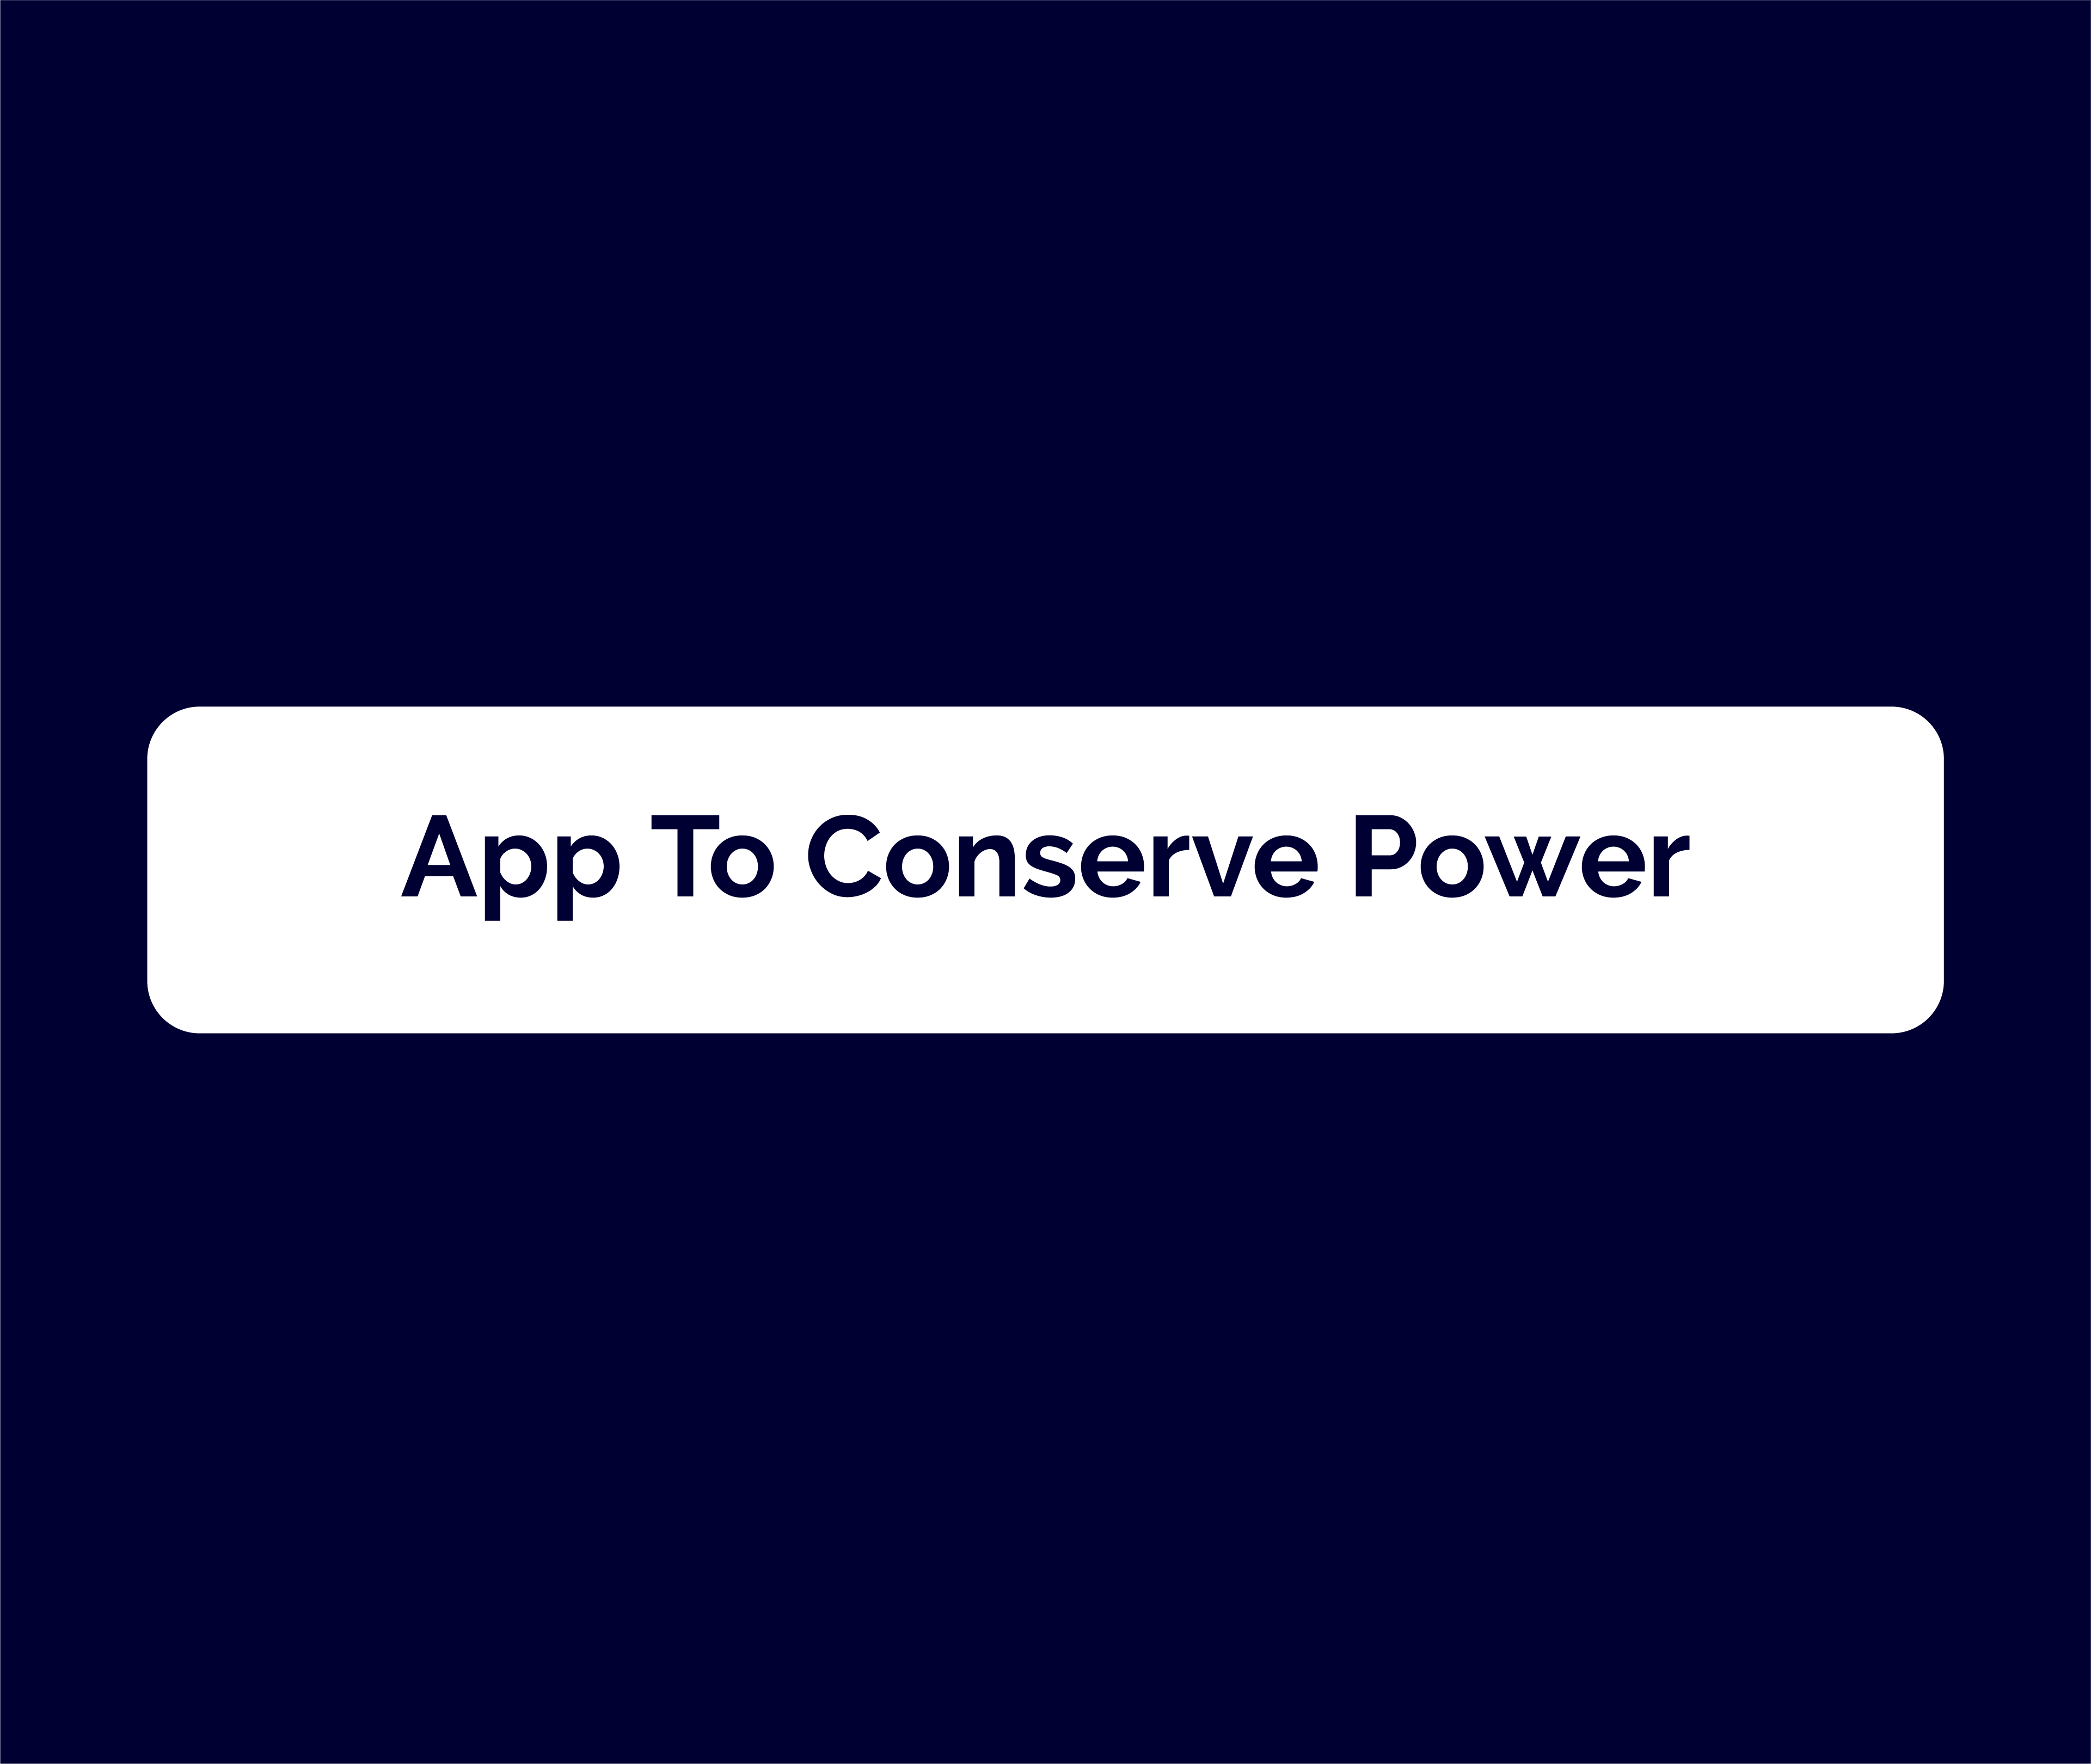 App To Conserve Power